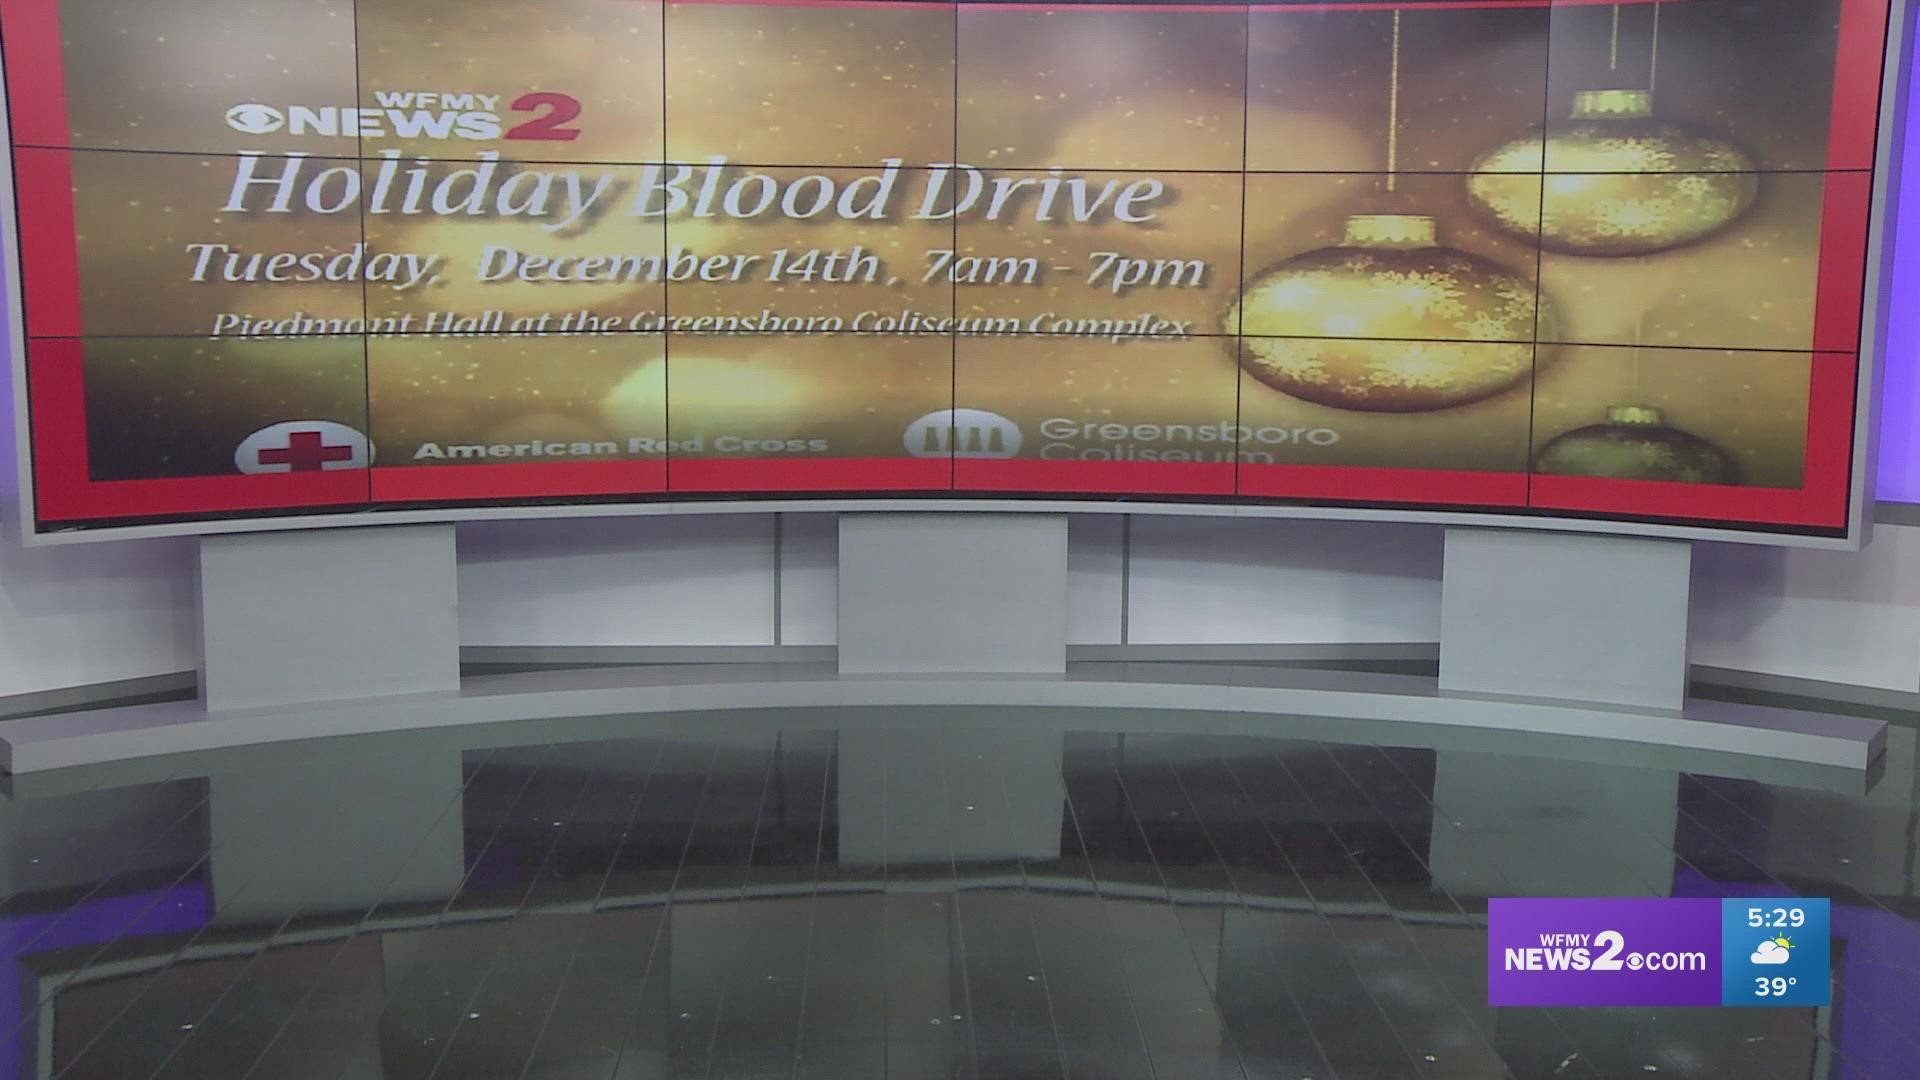 The WFMY News 2 Holiday blood drive is Tuesday, Dec. 14, from 7 a.m. to 7 p.m. at Piedmont Hall in the Greensboro Coliseum Complex.